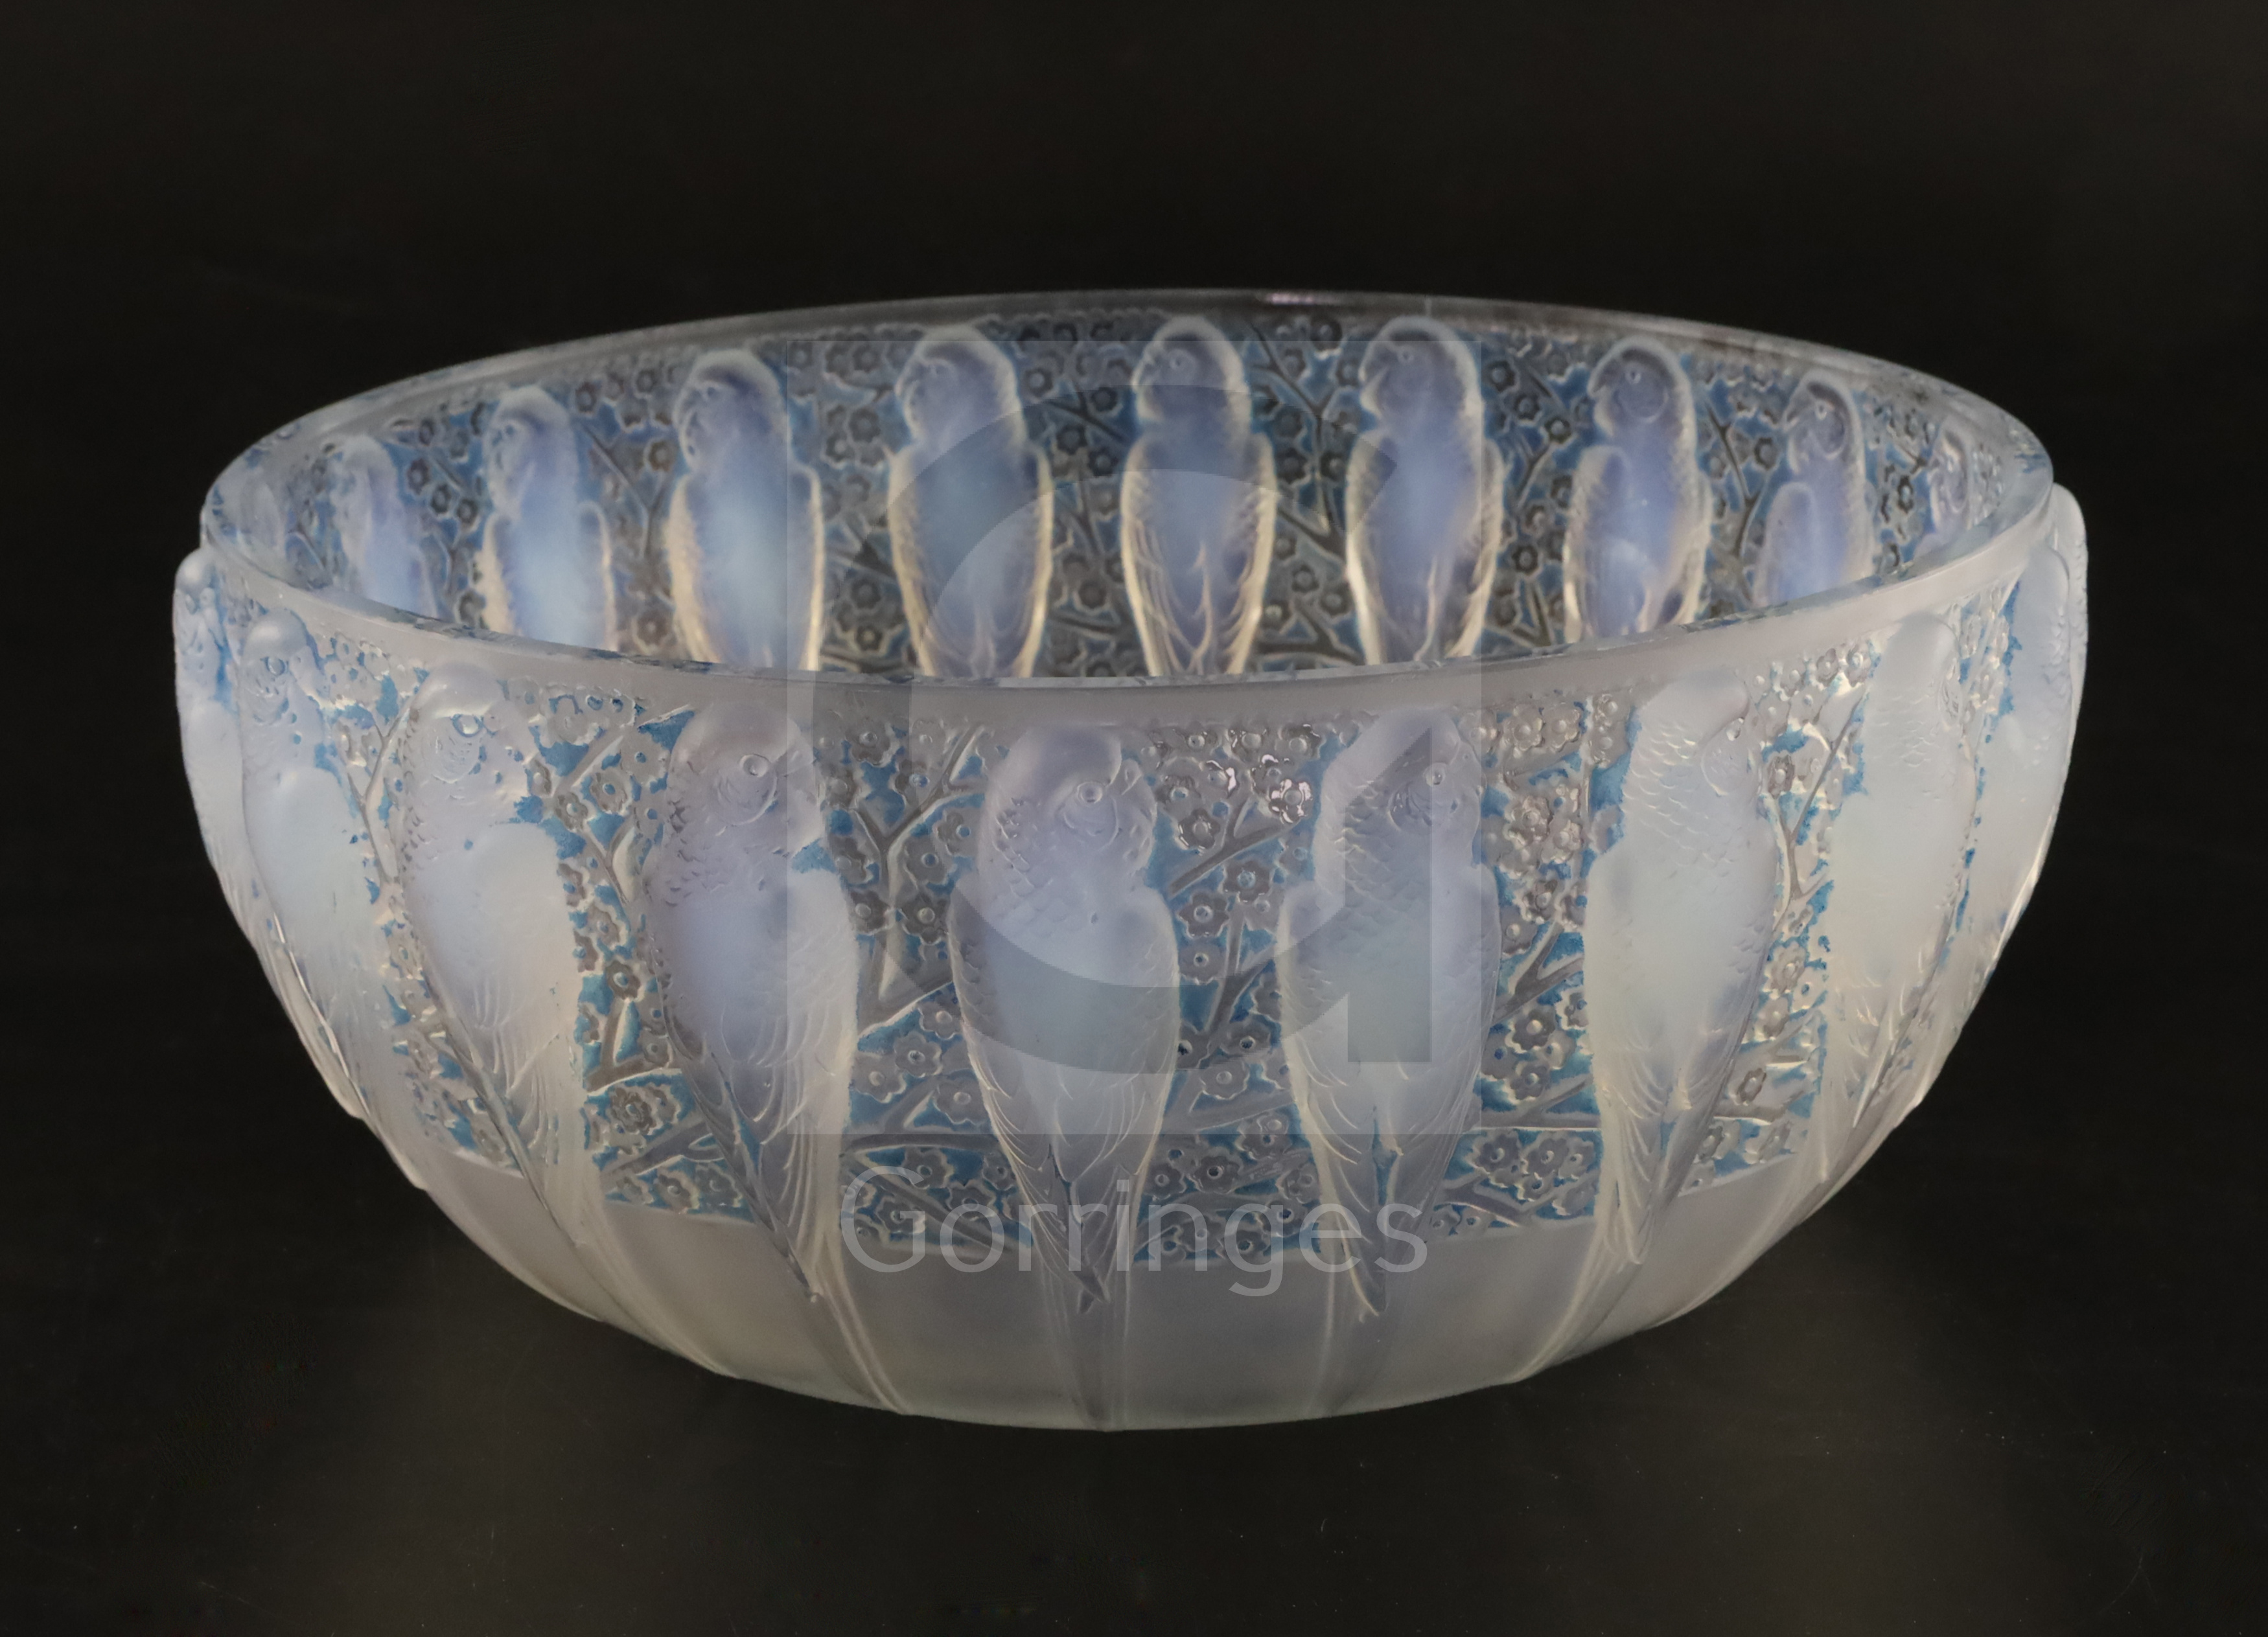 A Rene Lalique 'Perruches' blue-stained opalescent glass bowl, c.1931, model 419, etched mark 'R.